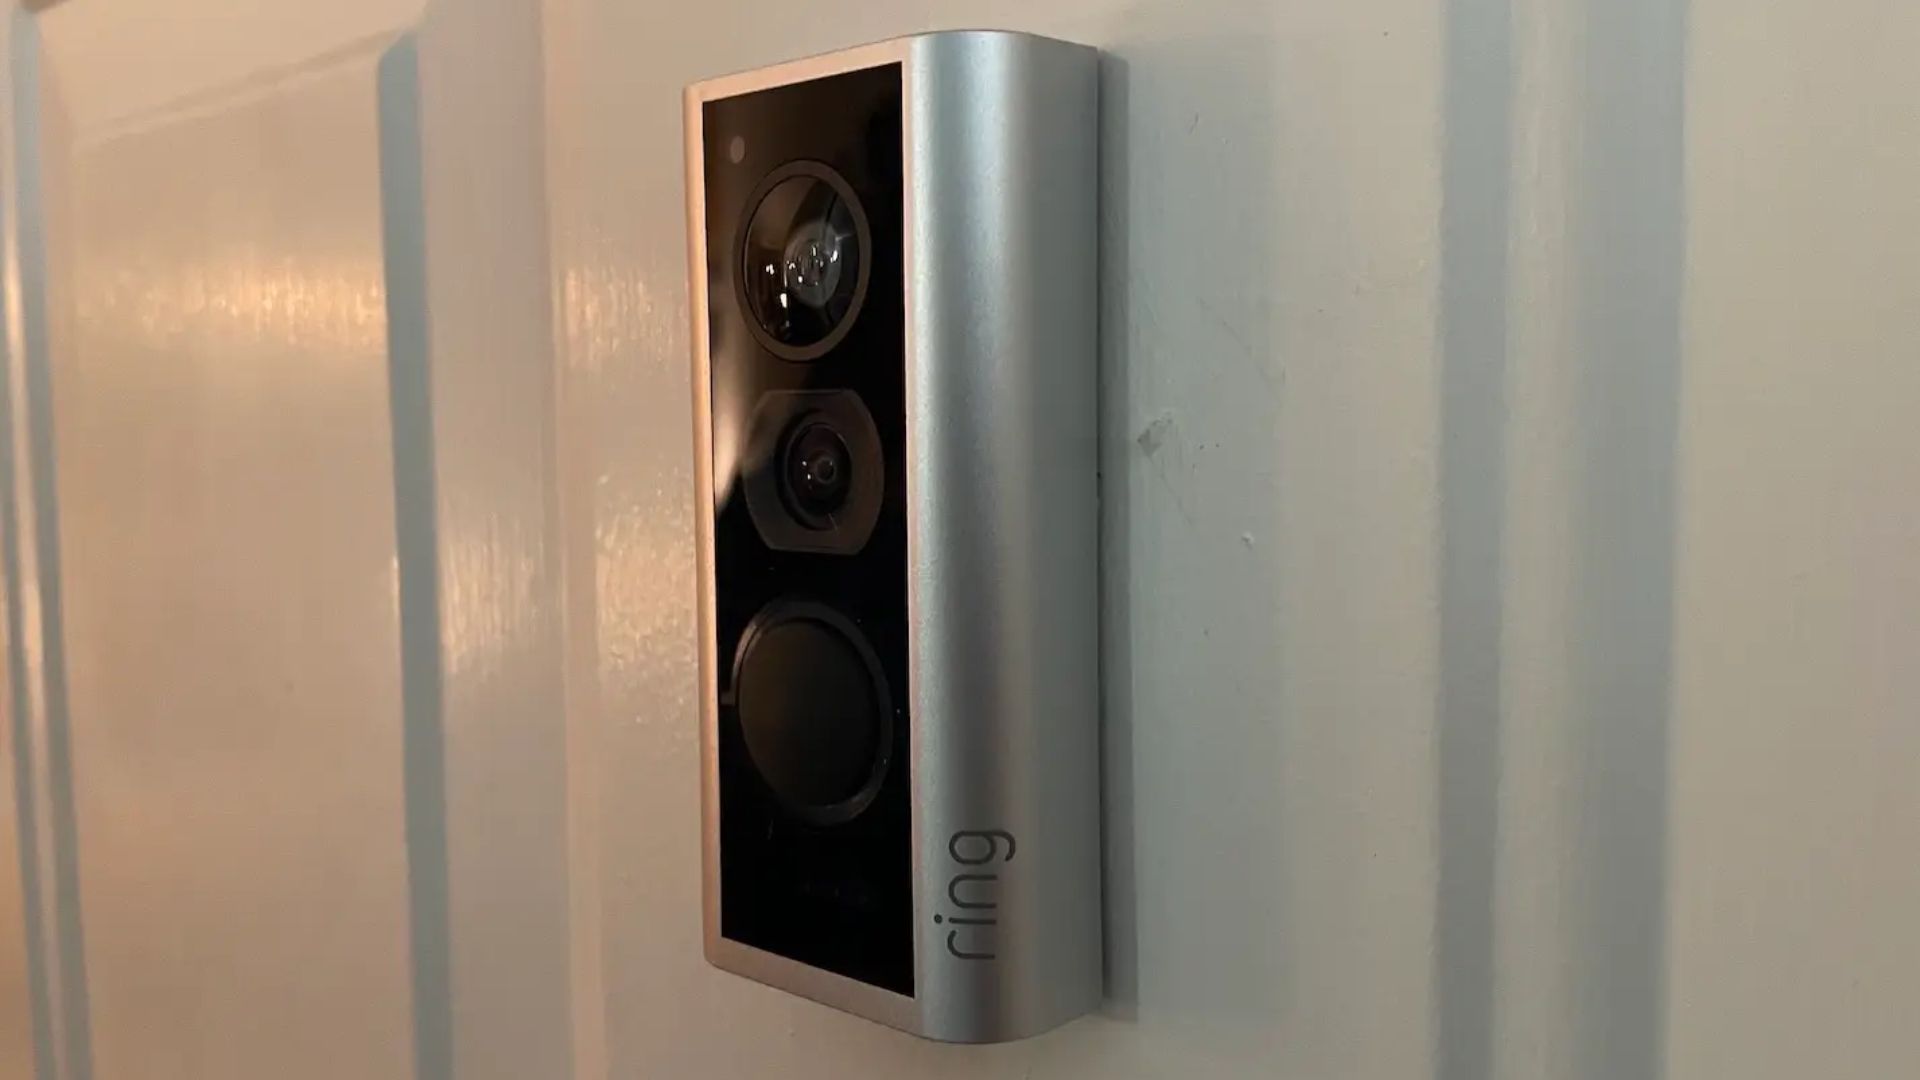 Ring Peephole Cam on a doorframe